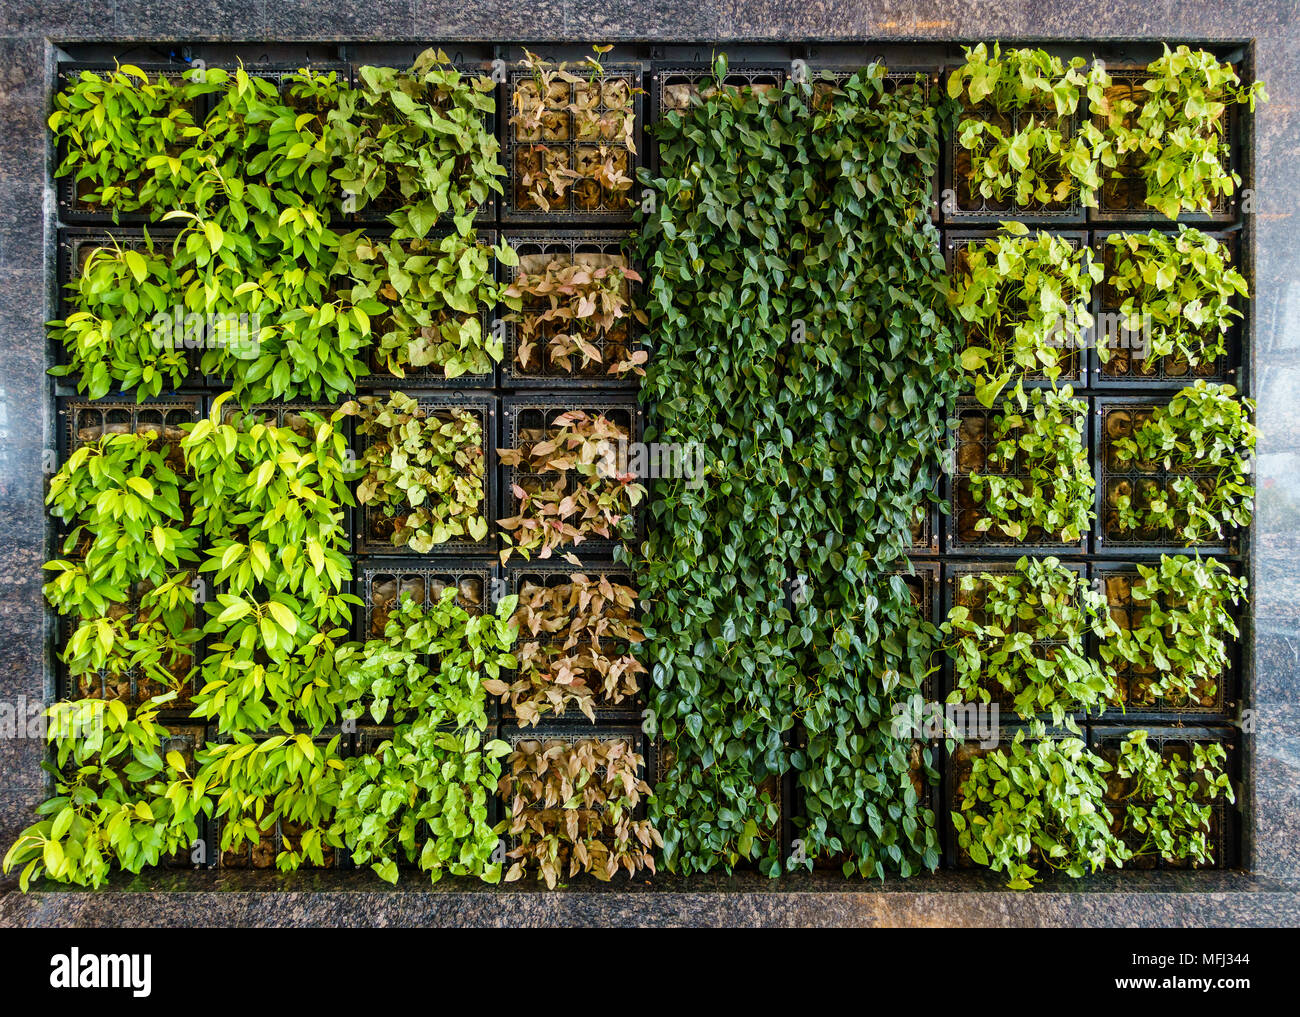 Indoor green wall also known as living wall or vertical garden Stock Photo